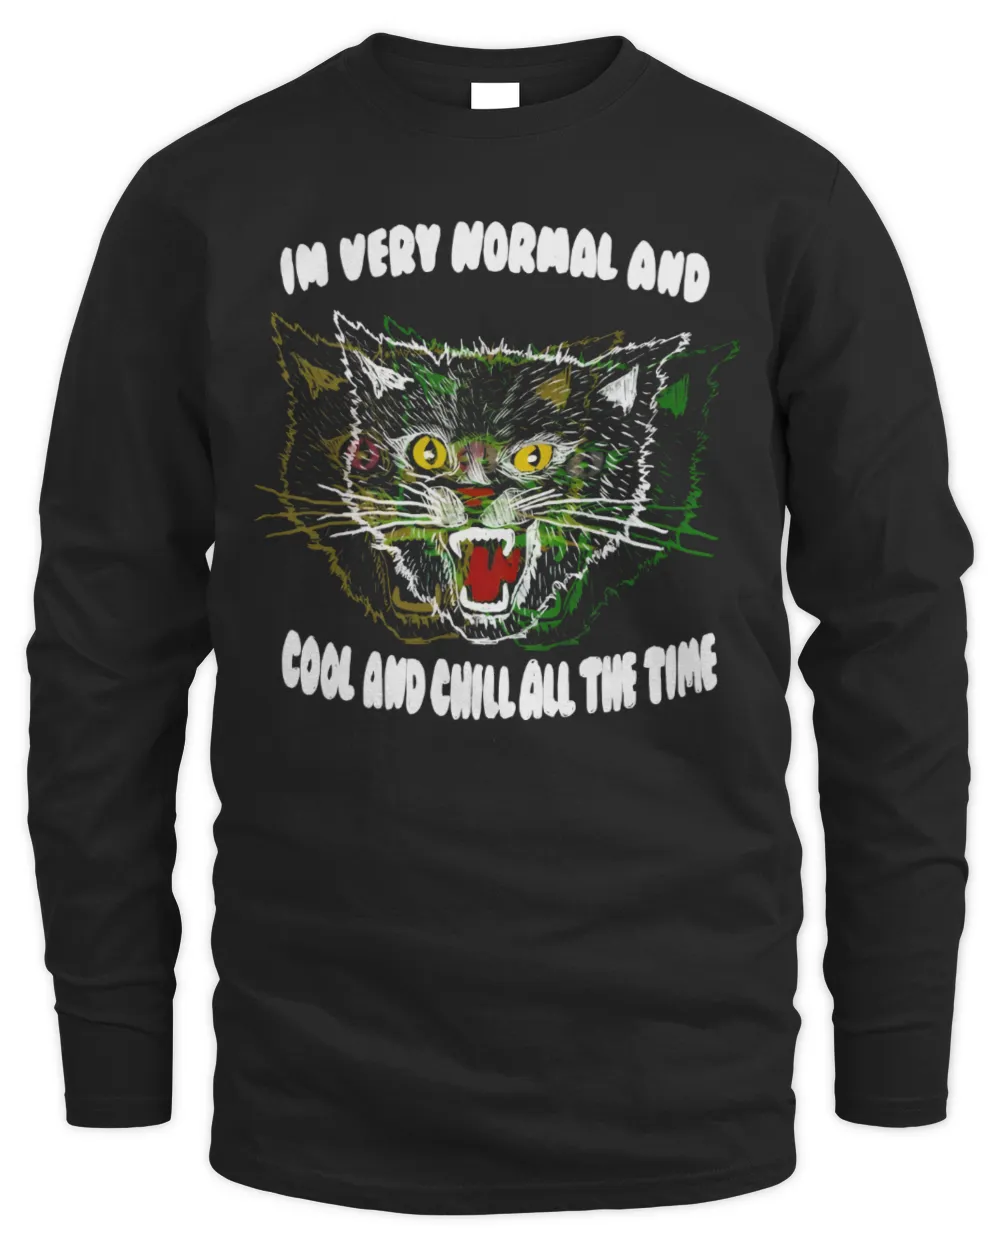 Very Normal, Cool, and Chill All the Time Shirt